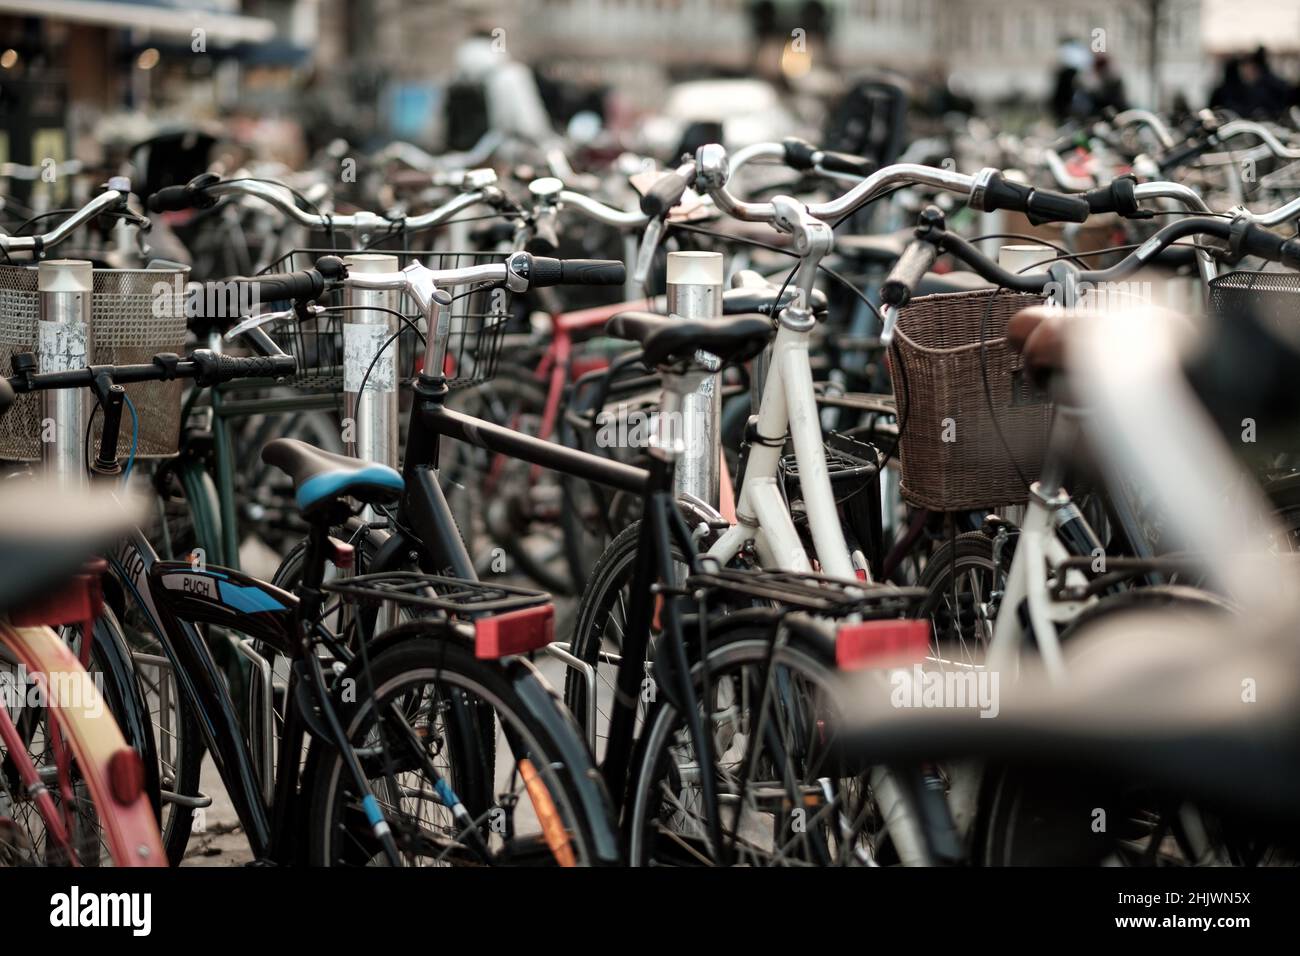 More than 60% of Danes ride a bike each day to commute to and from work. Bicycle parking can be found all around the city of Copenhagen. Stock Photo